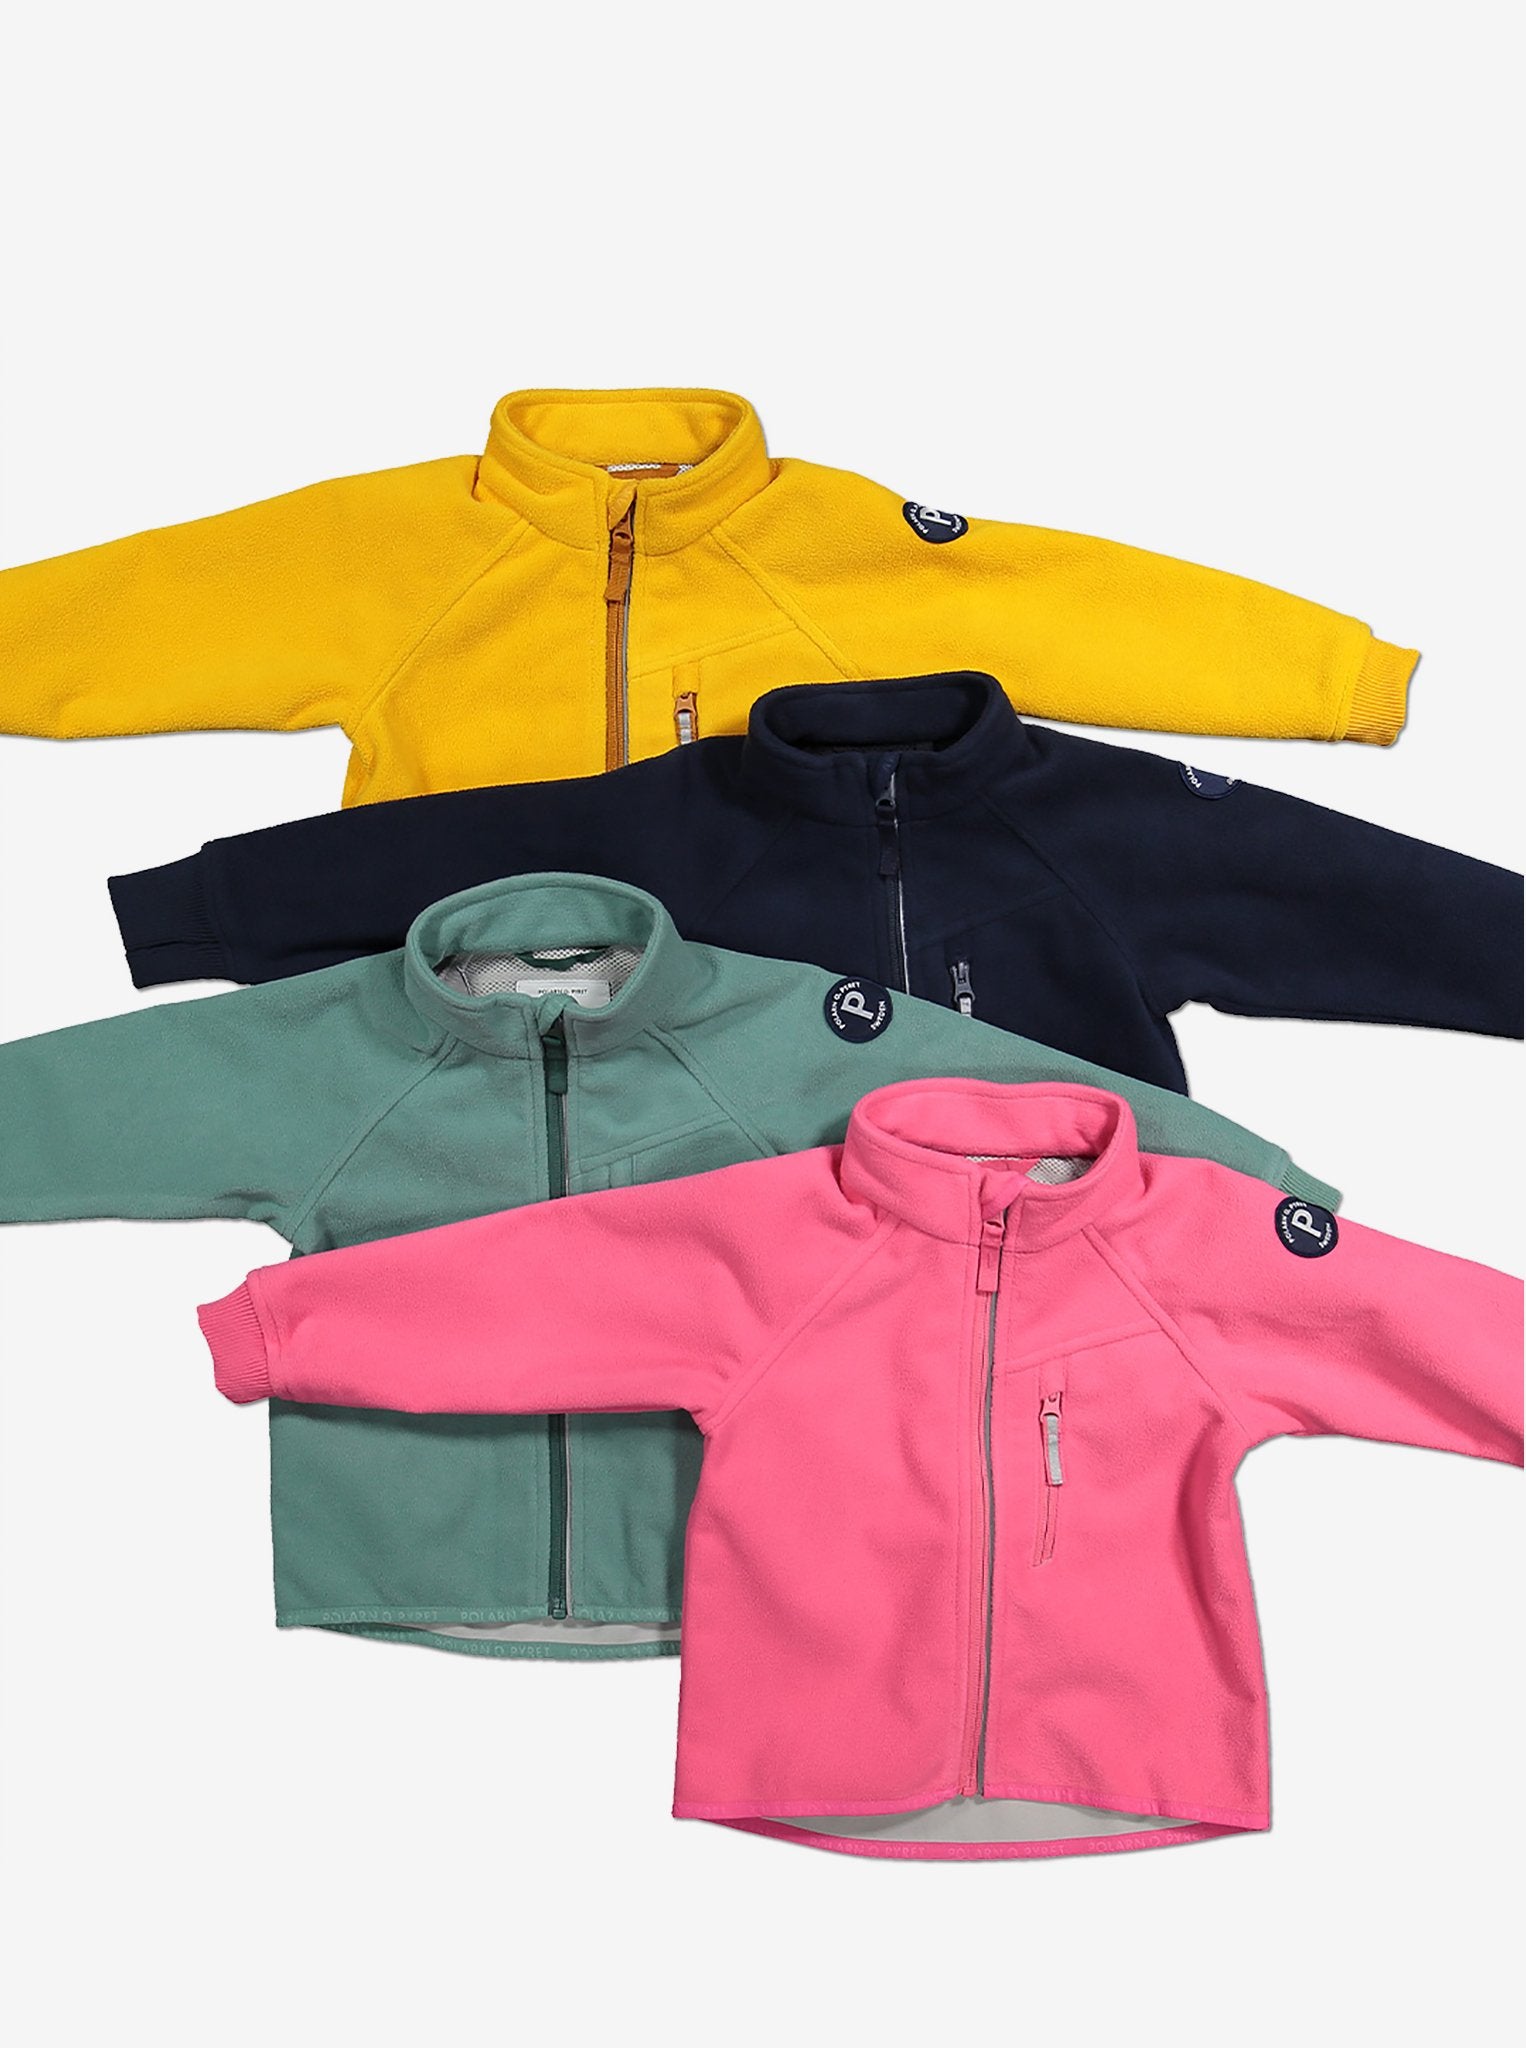 4 pieces of kids waterproof fleece jacket in yellow, navy, green and pink with reflector zips and cuff thumbholes.